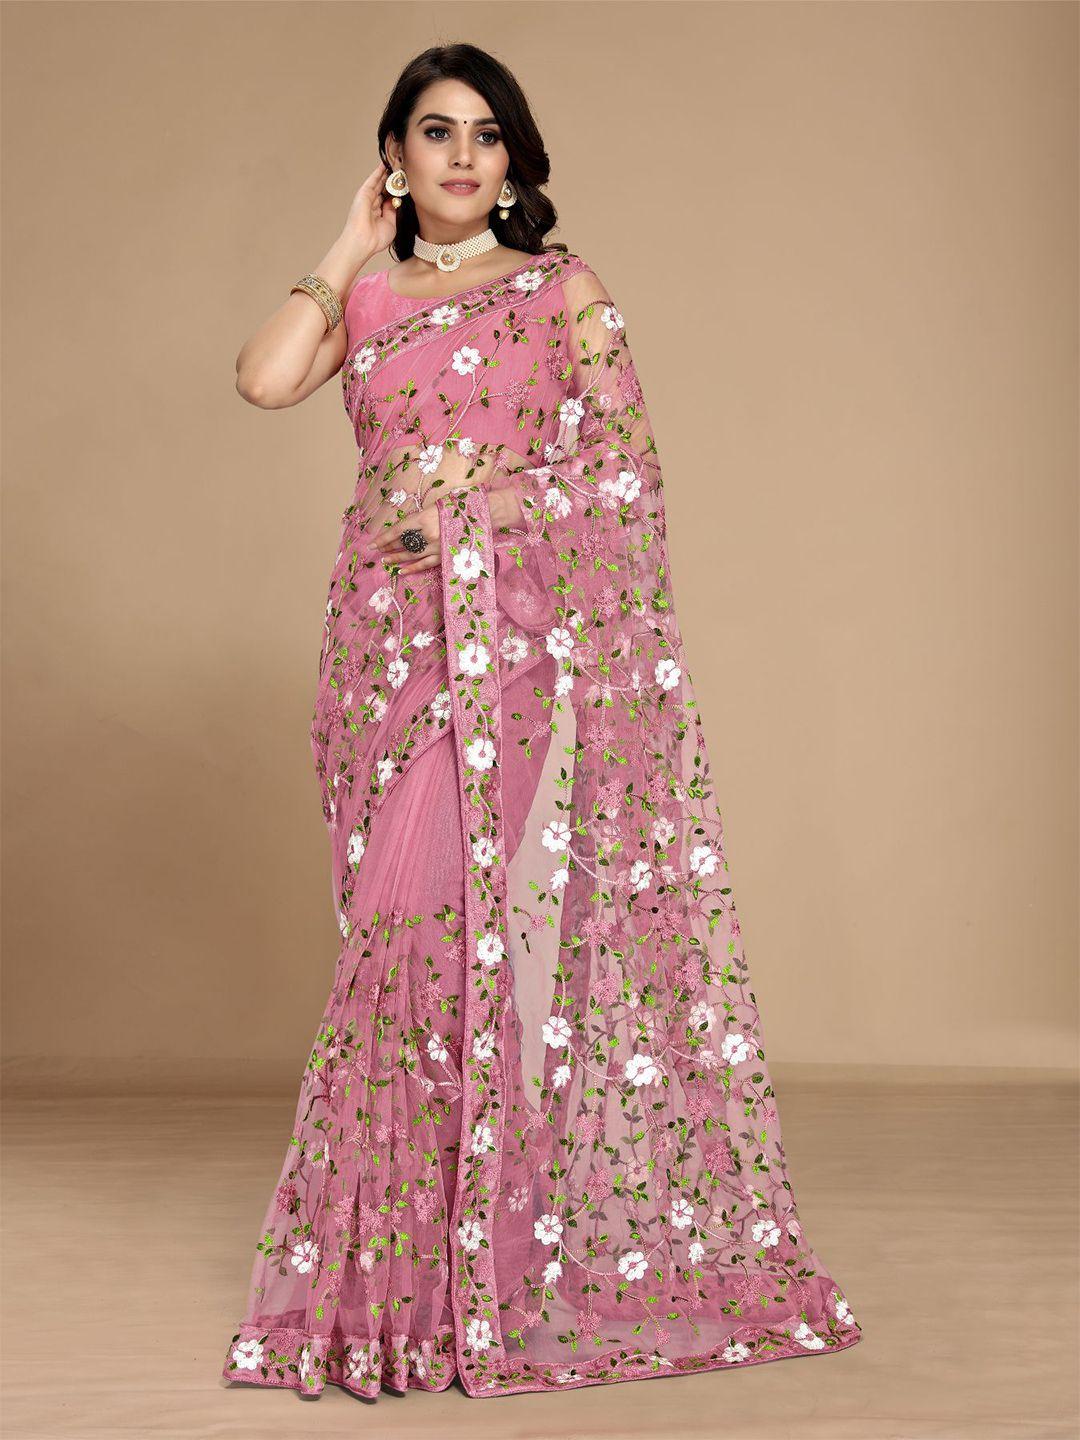 vairagee-floral-embroidered-net-fusion-saree